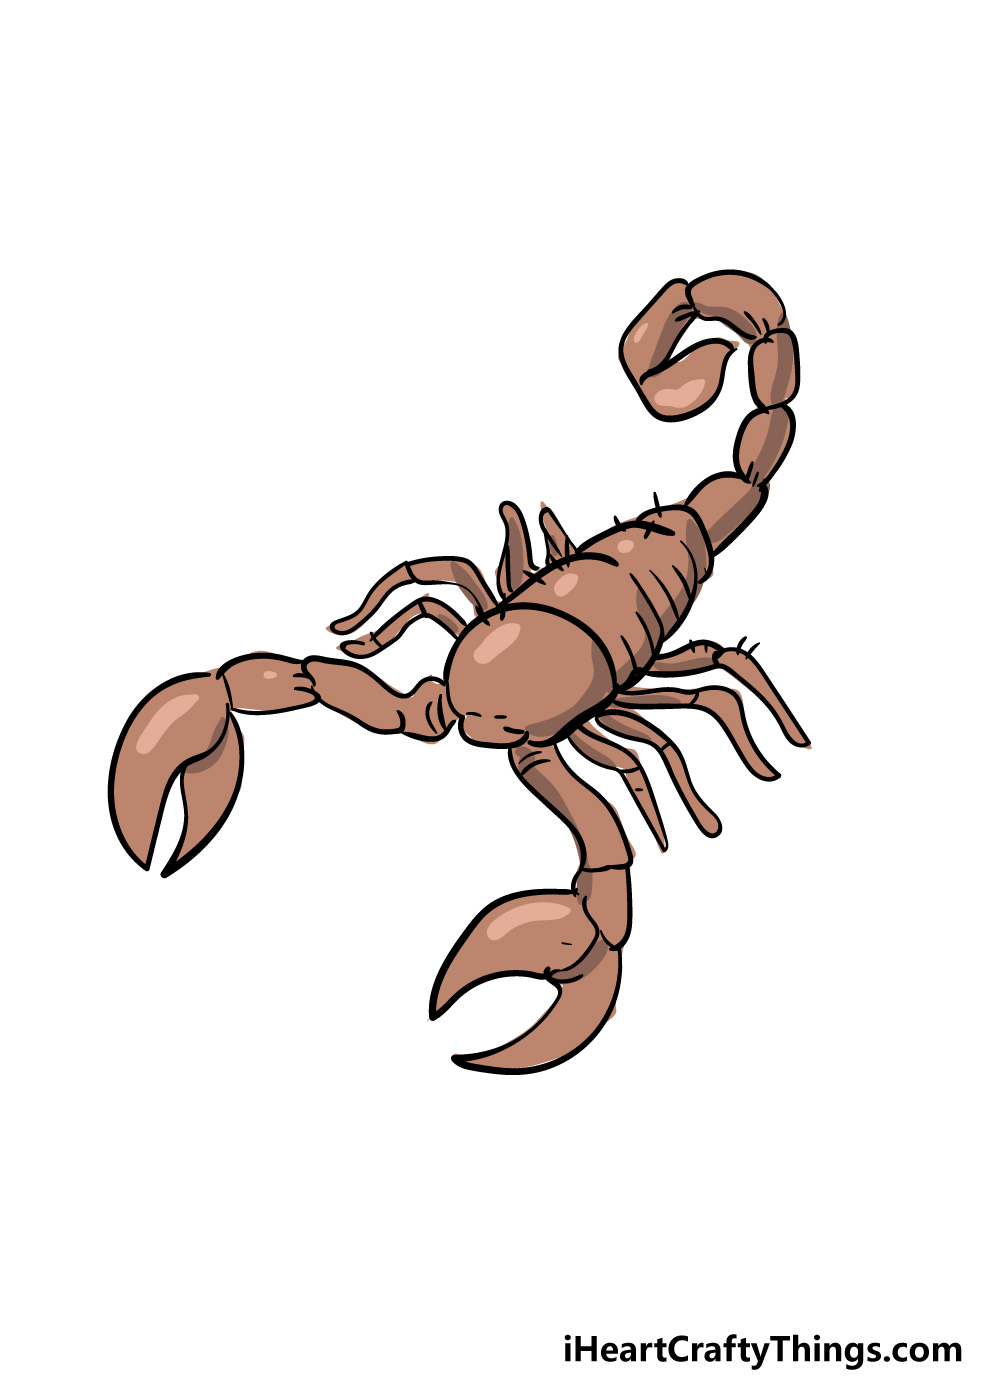 Scorpion Drawing - How To Draw A Scorpion Step By Step